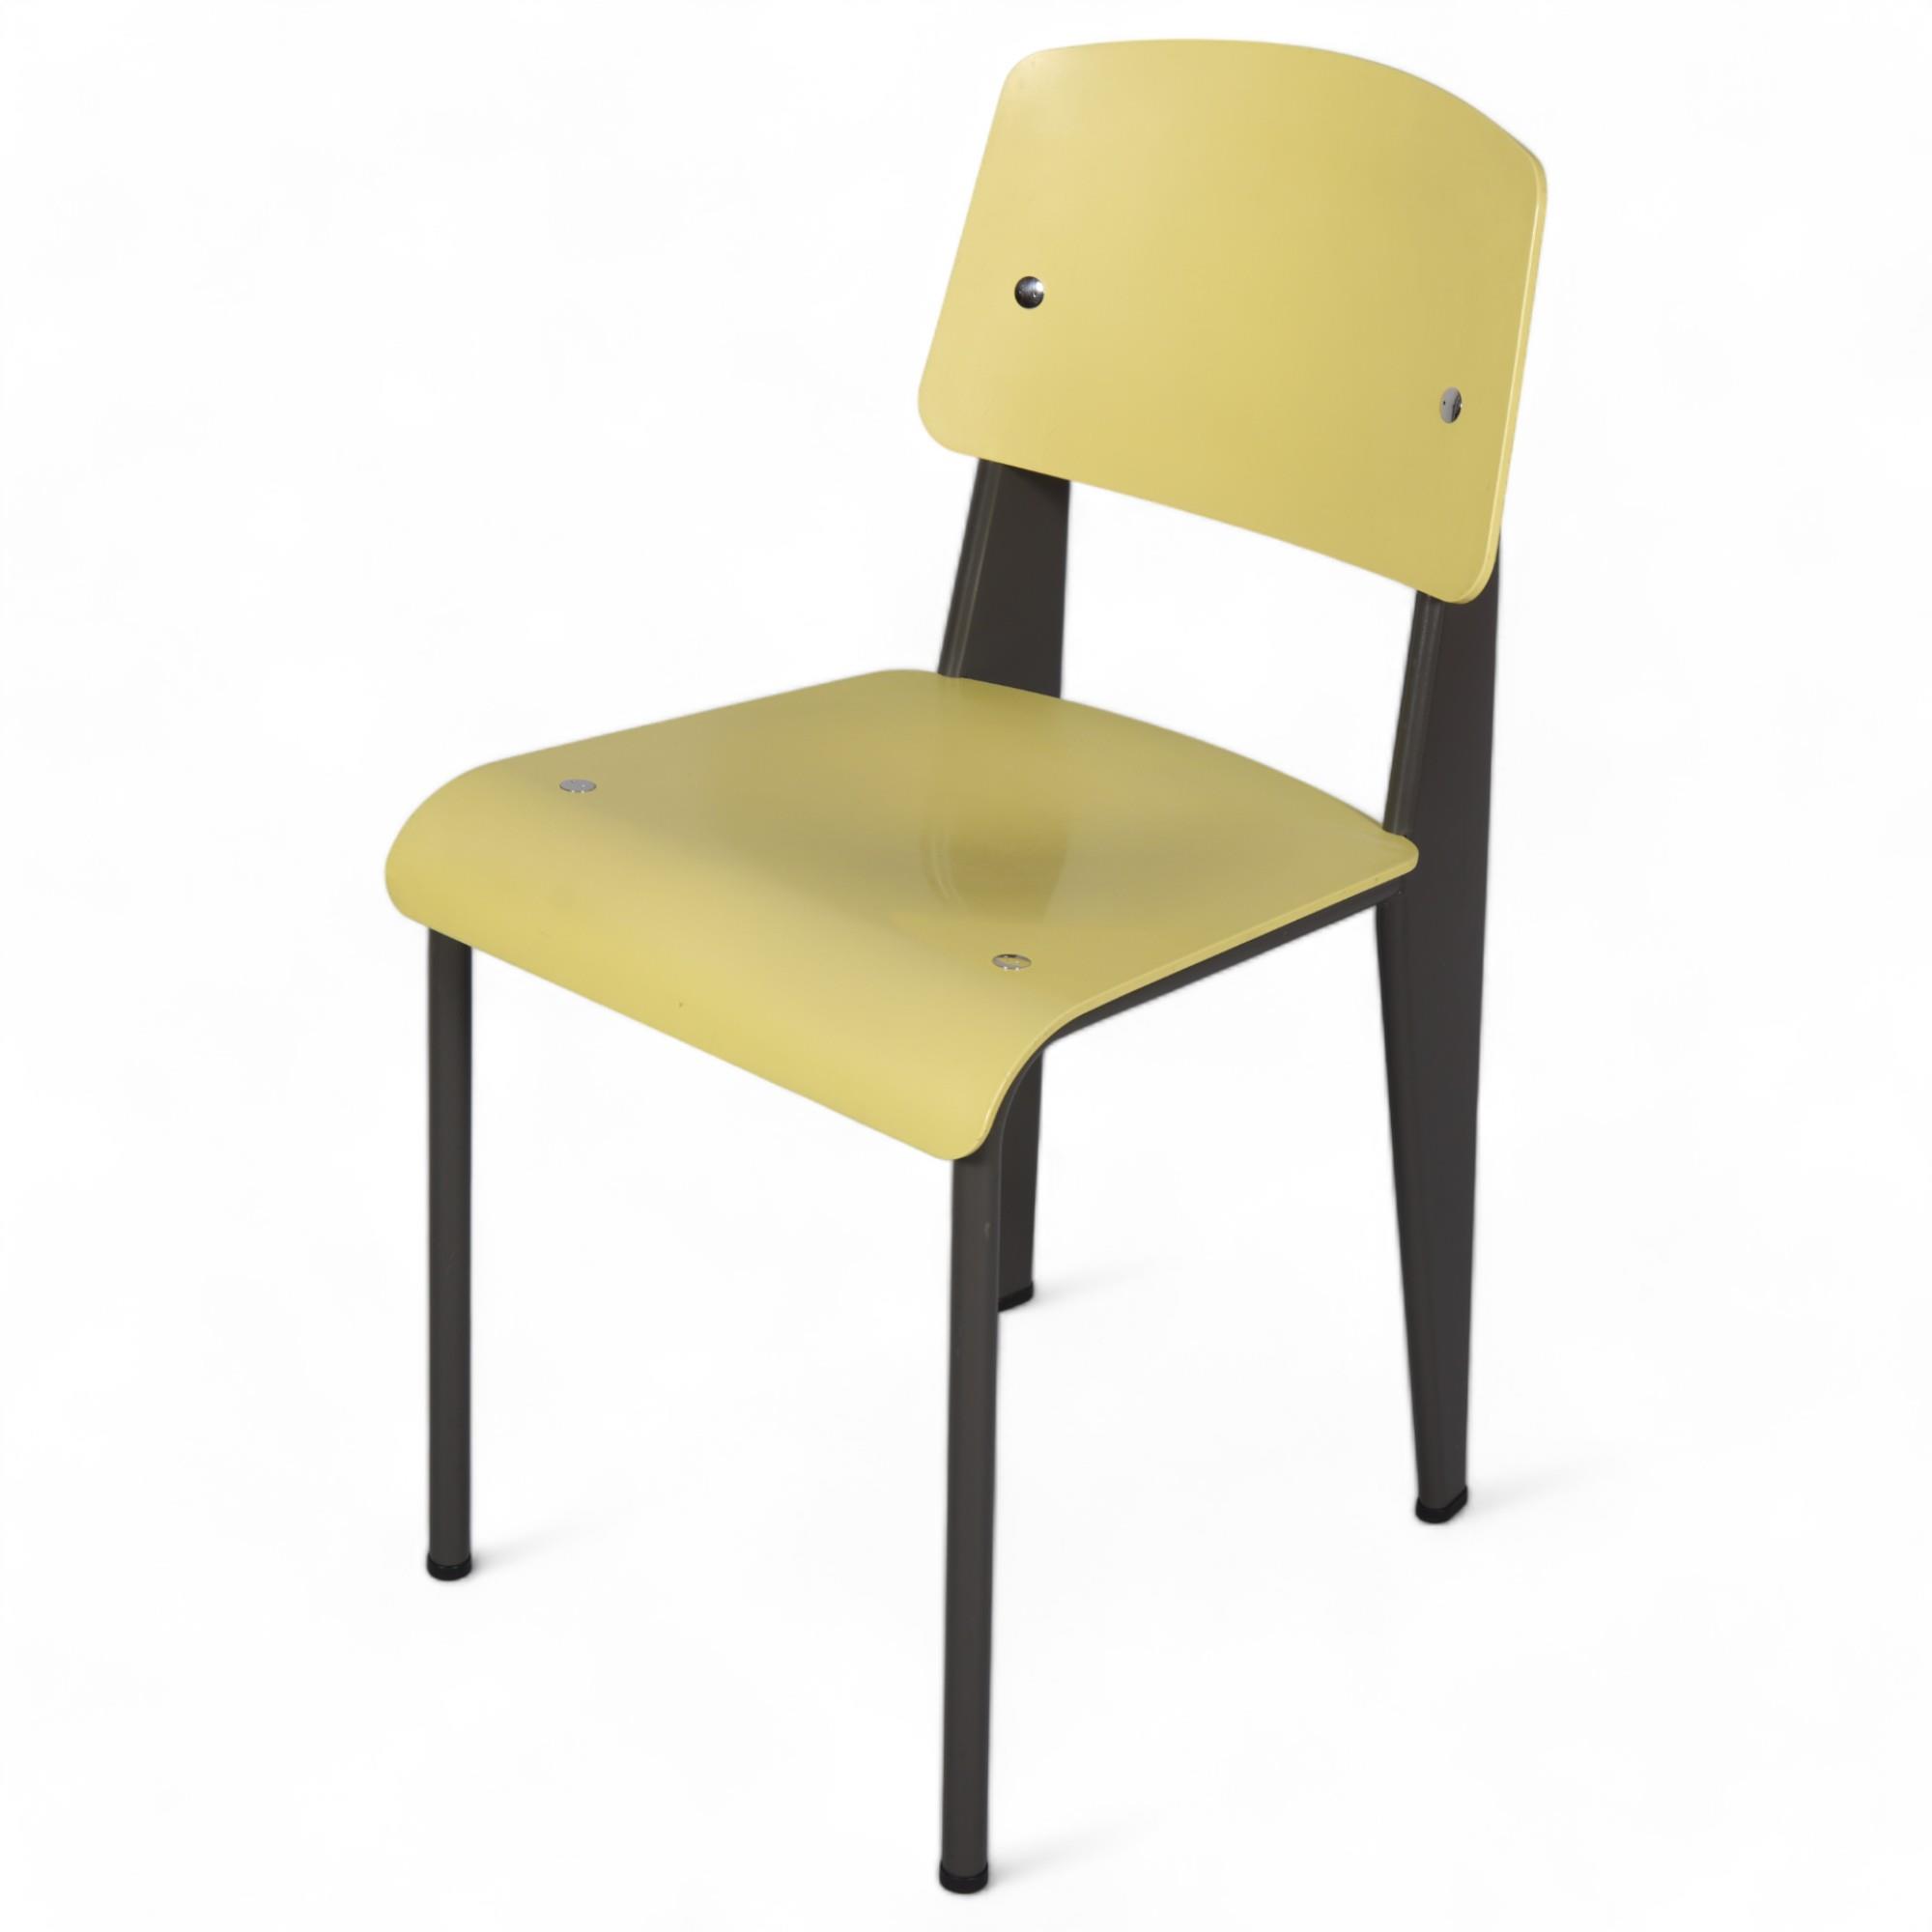 JEAN PROUVE - A Vitra Standard SP chair, citron seat on basalt grey base, with maker's labels and